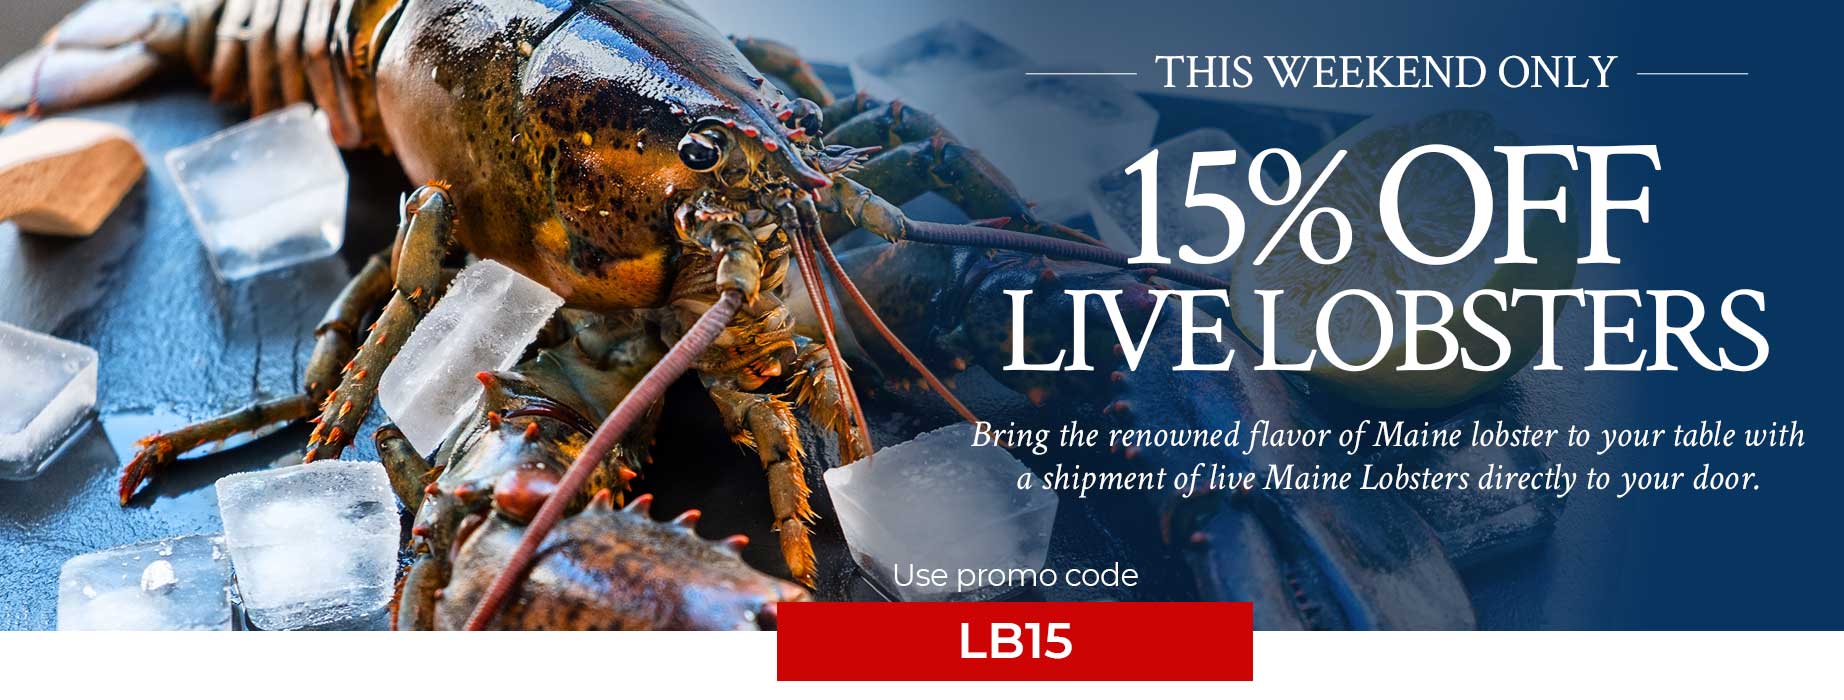 Receive 15% off all live lobsters. Use code: LB15